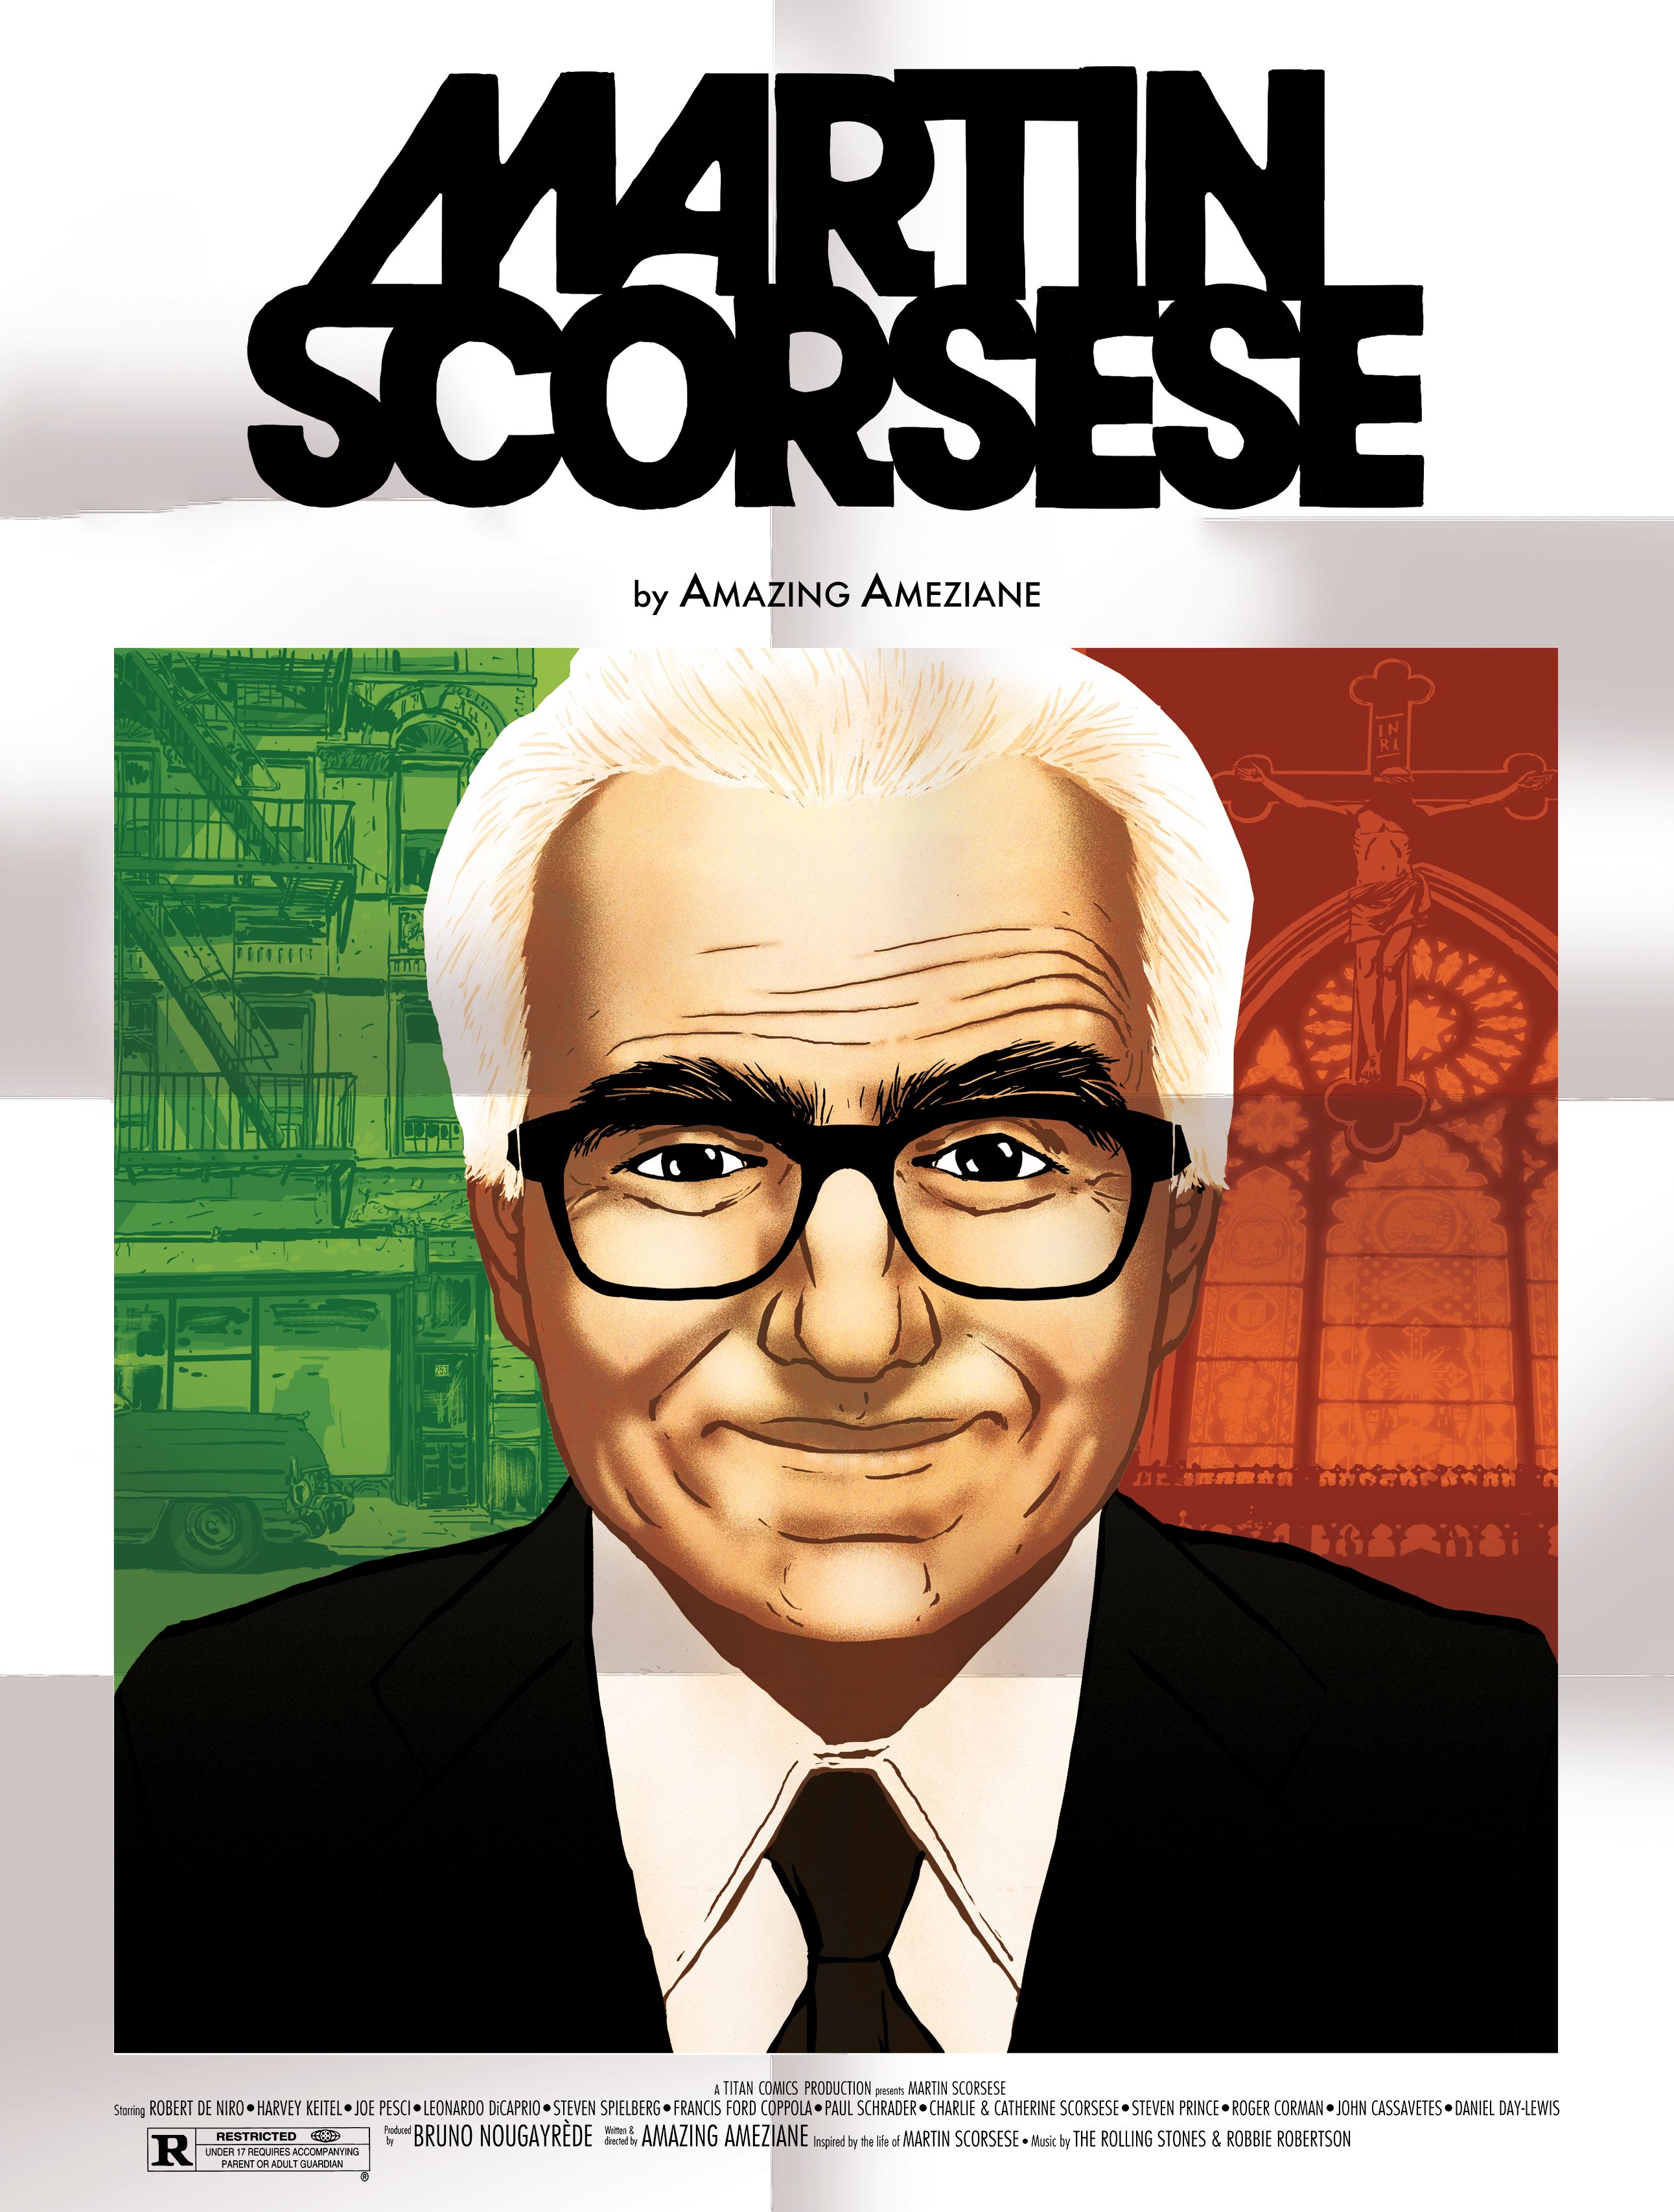 Martin Scorsese’s Life & Career To Be Told in Graphic Novel (Exclusive)